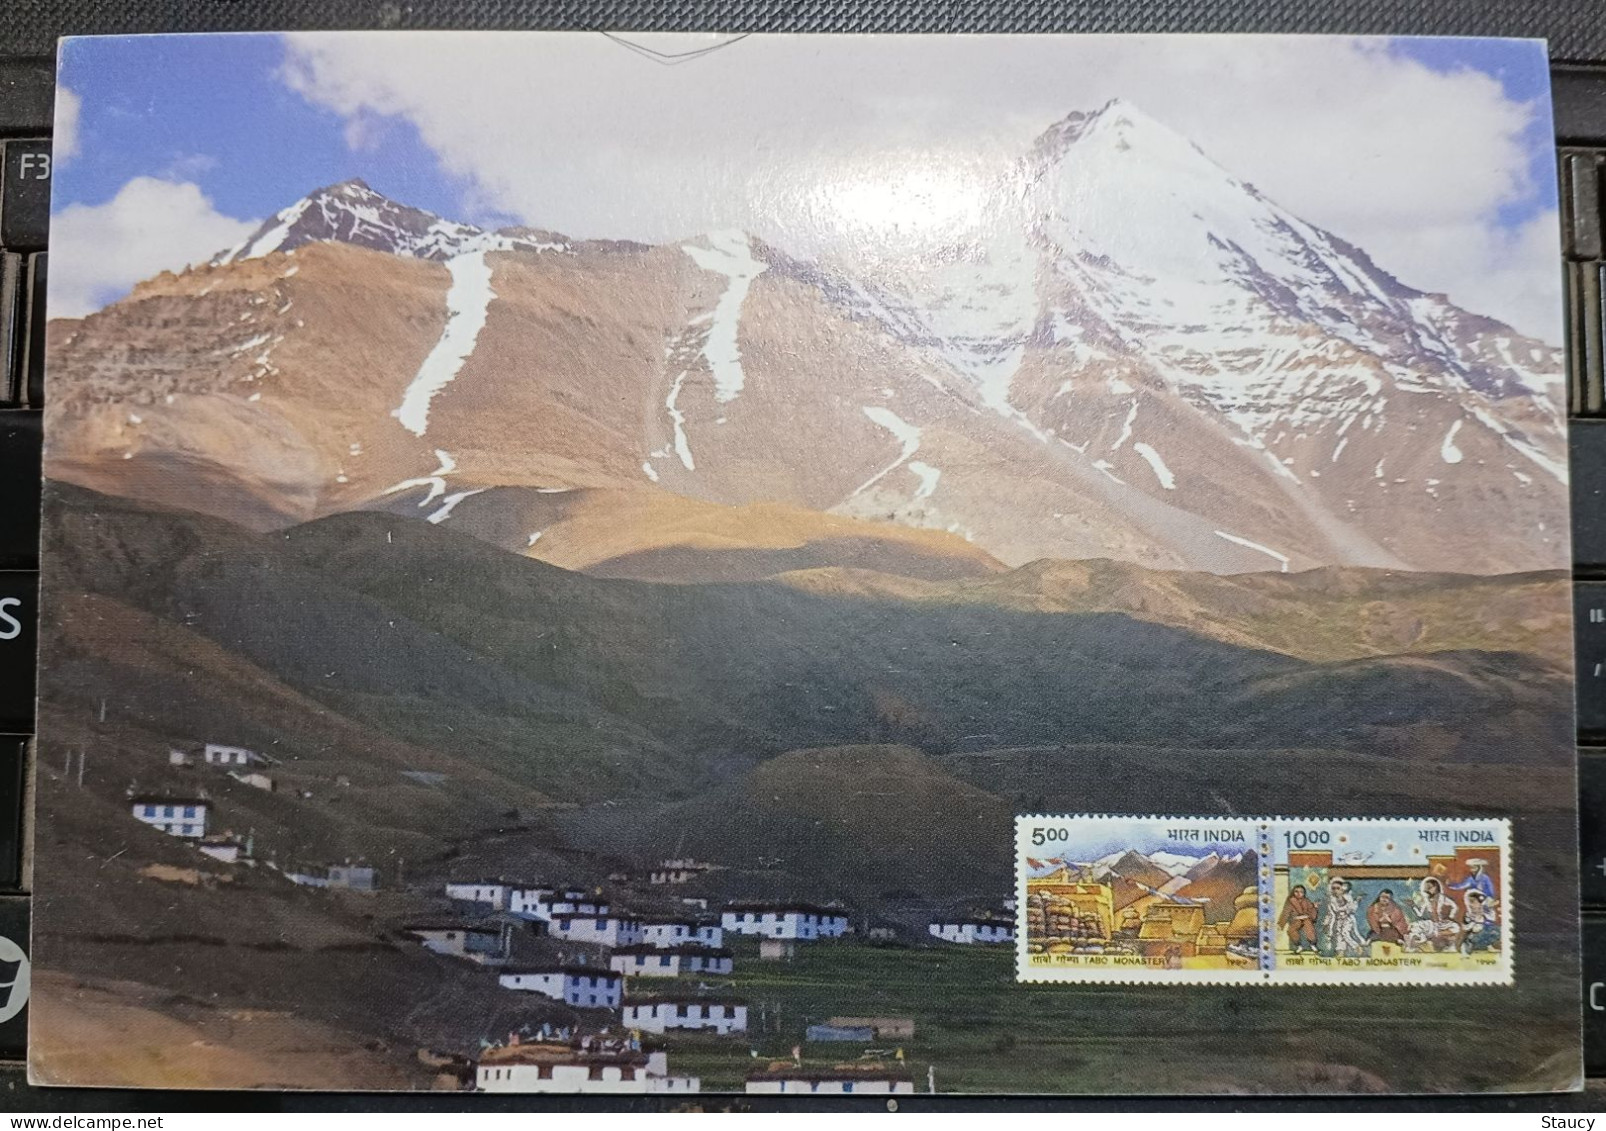 India 2007 Langza Spiti Valley Himanchal Pradesh India Post Picture Post Card As Per Scan - Bouddhisme